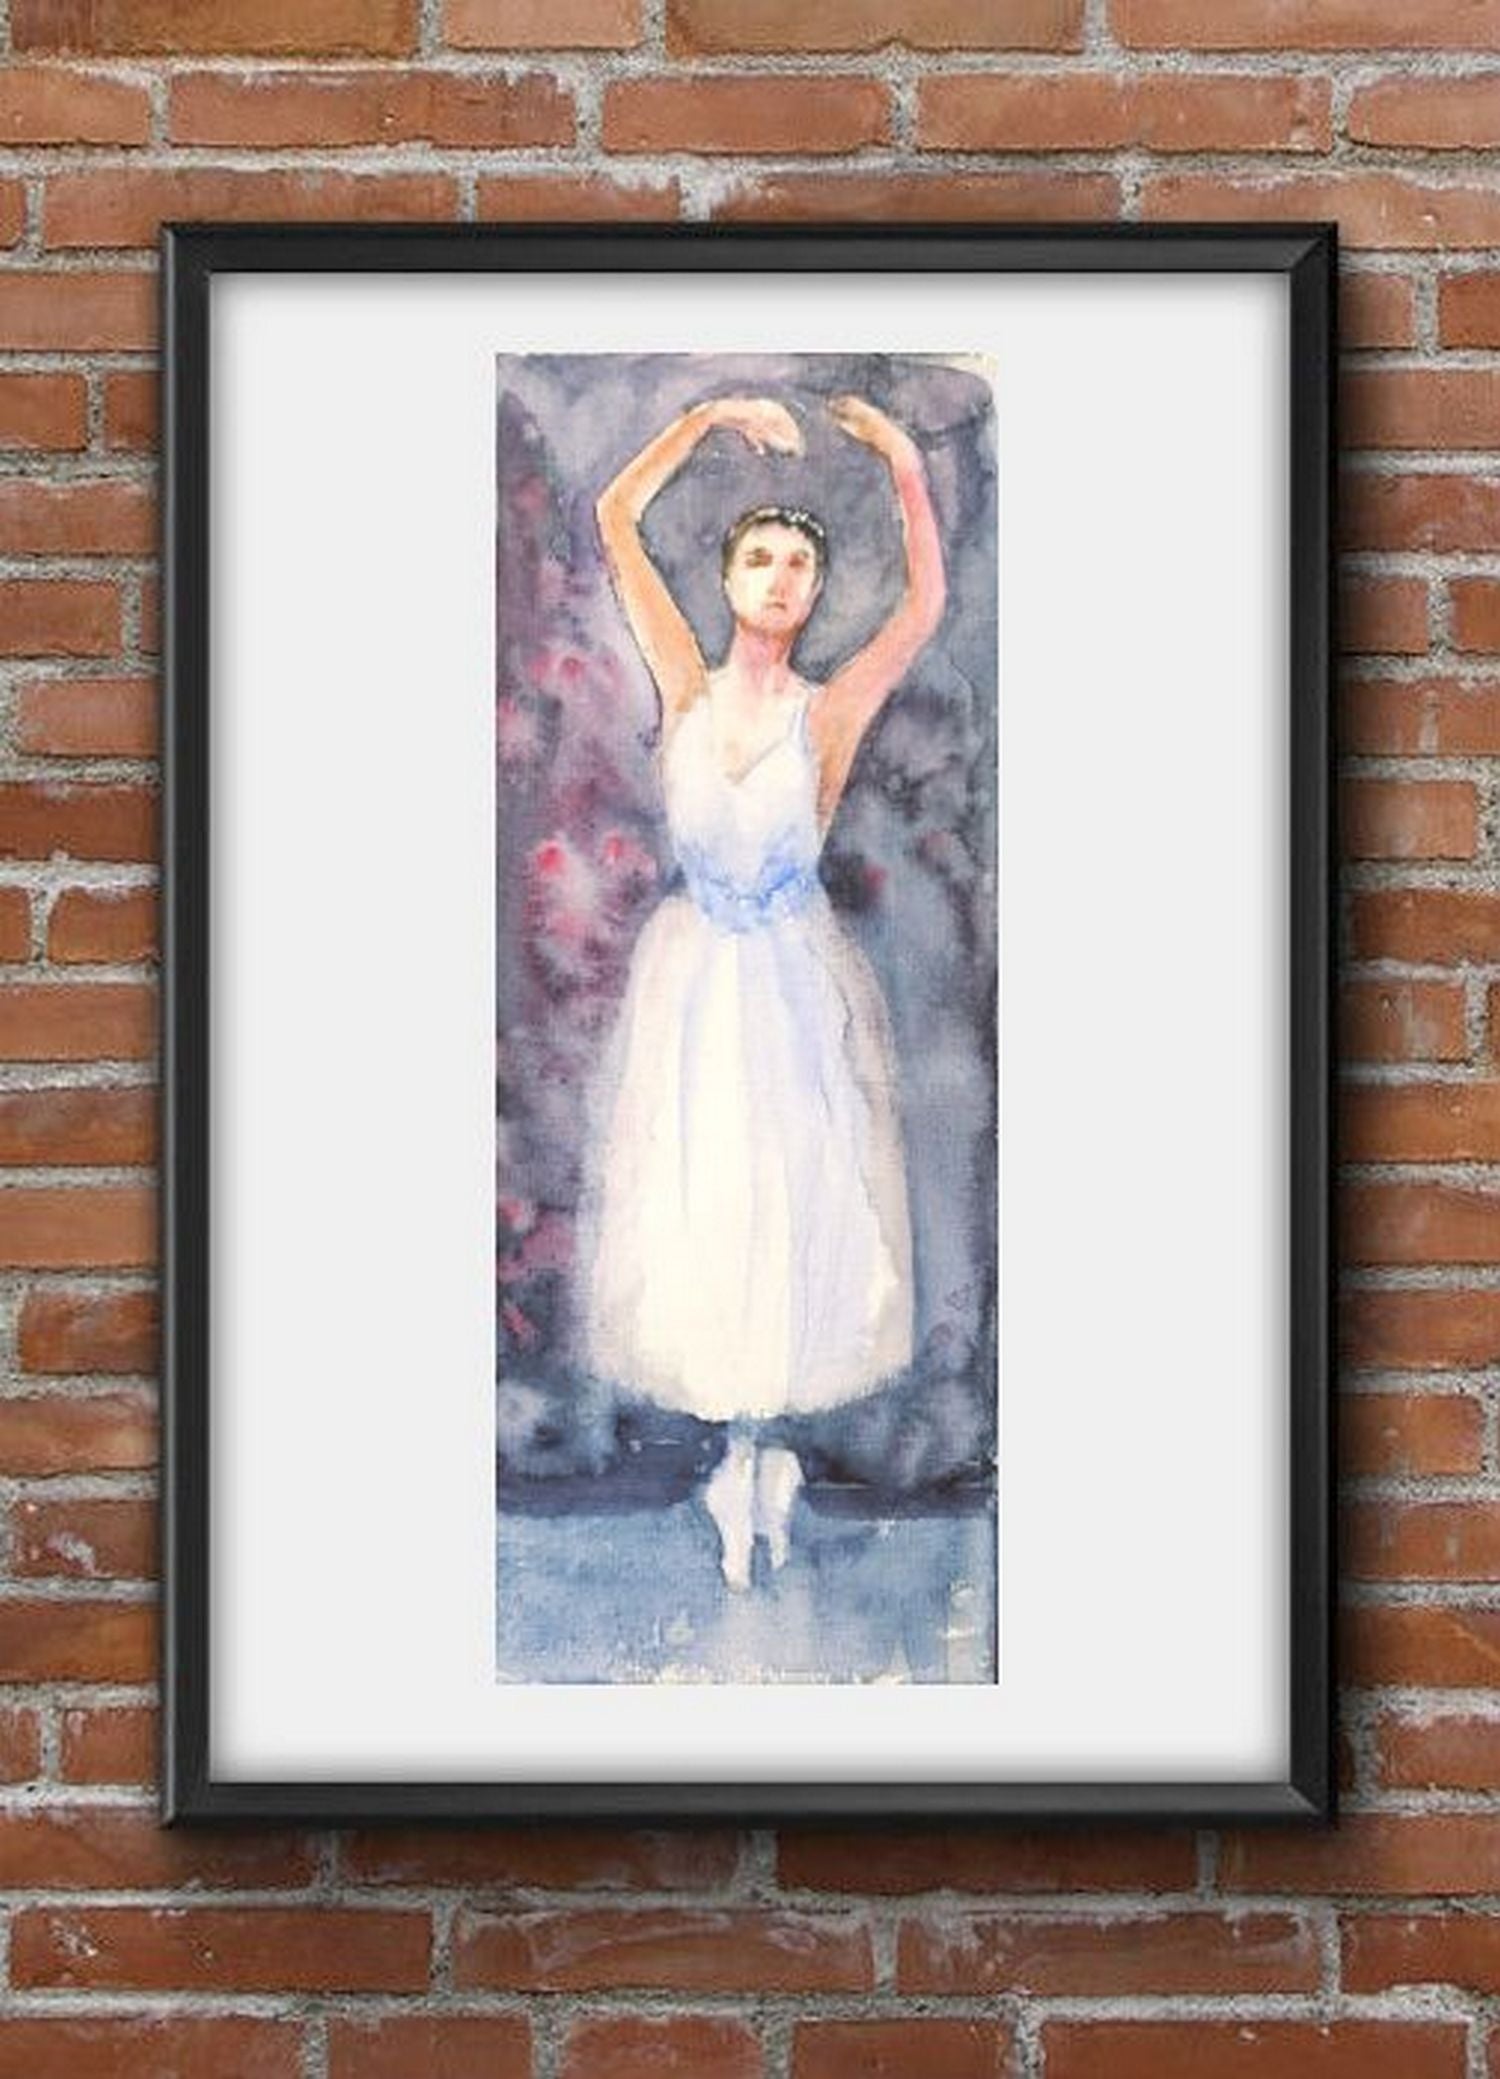 Ballerina on the stage, in a virtual frame